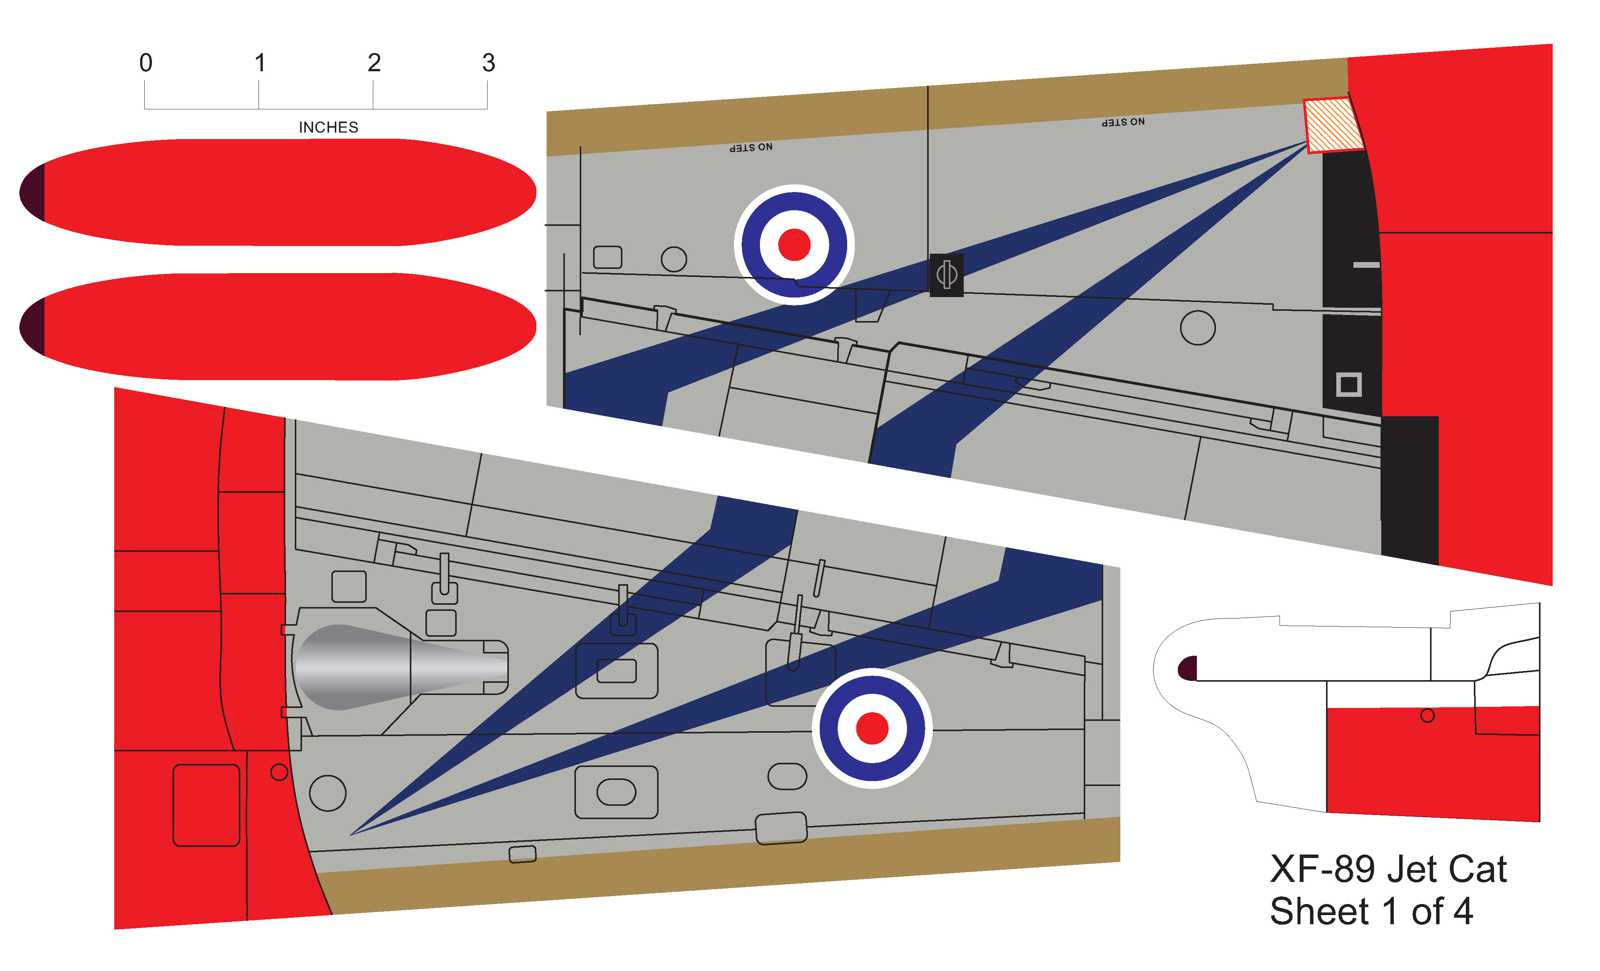 https://0201.nccdn.net/1_2/000/000/142/280/Pages-from-Jet-Provost-covering-layouts-1600x971.jpg